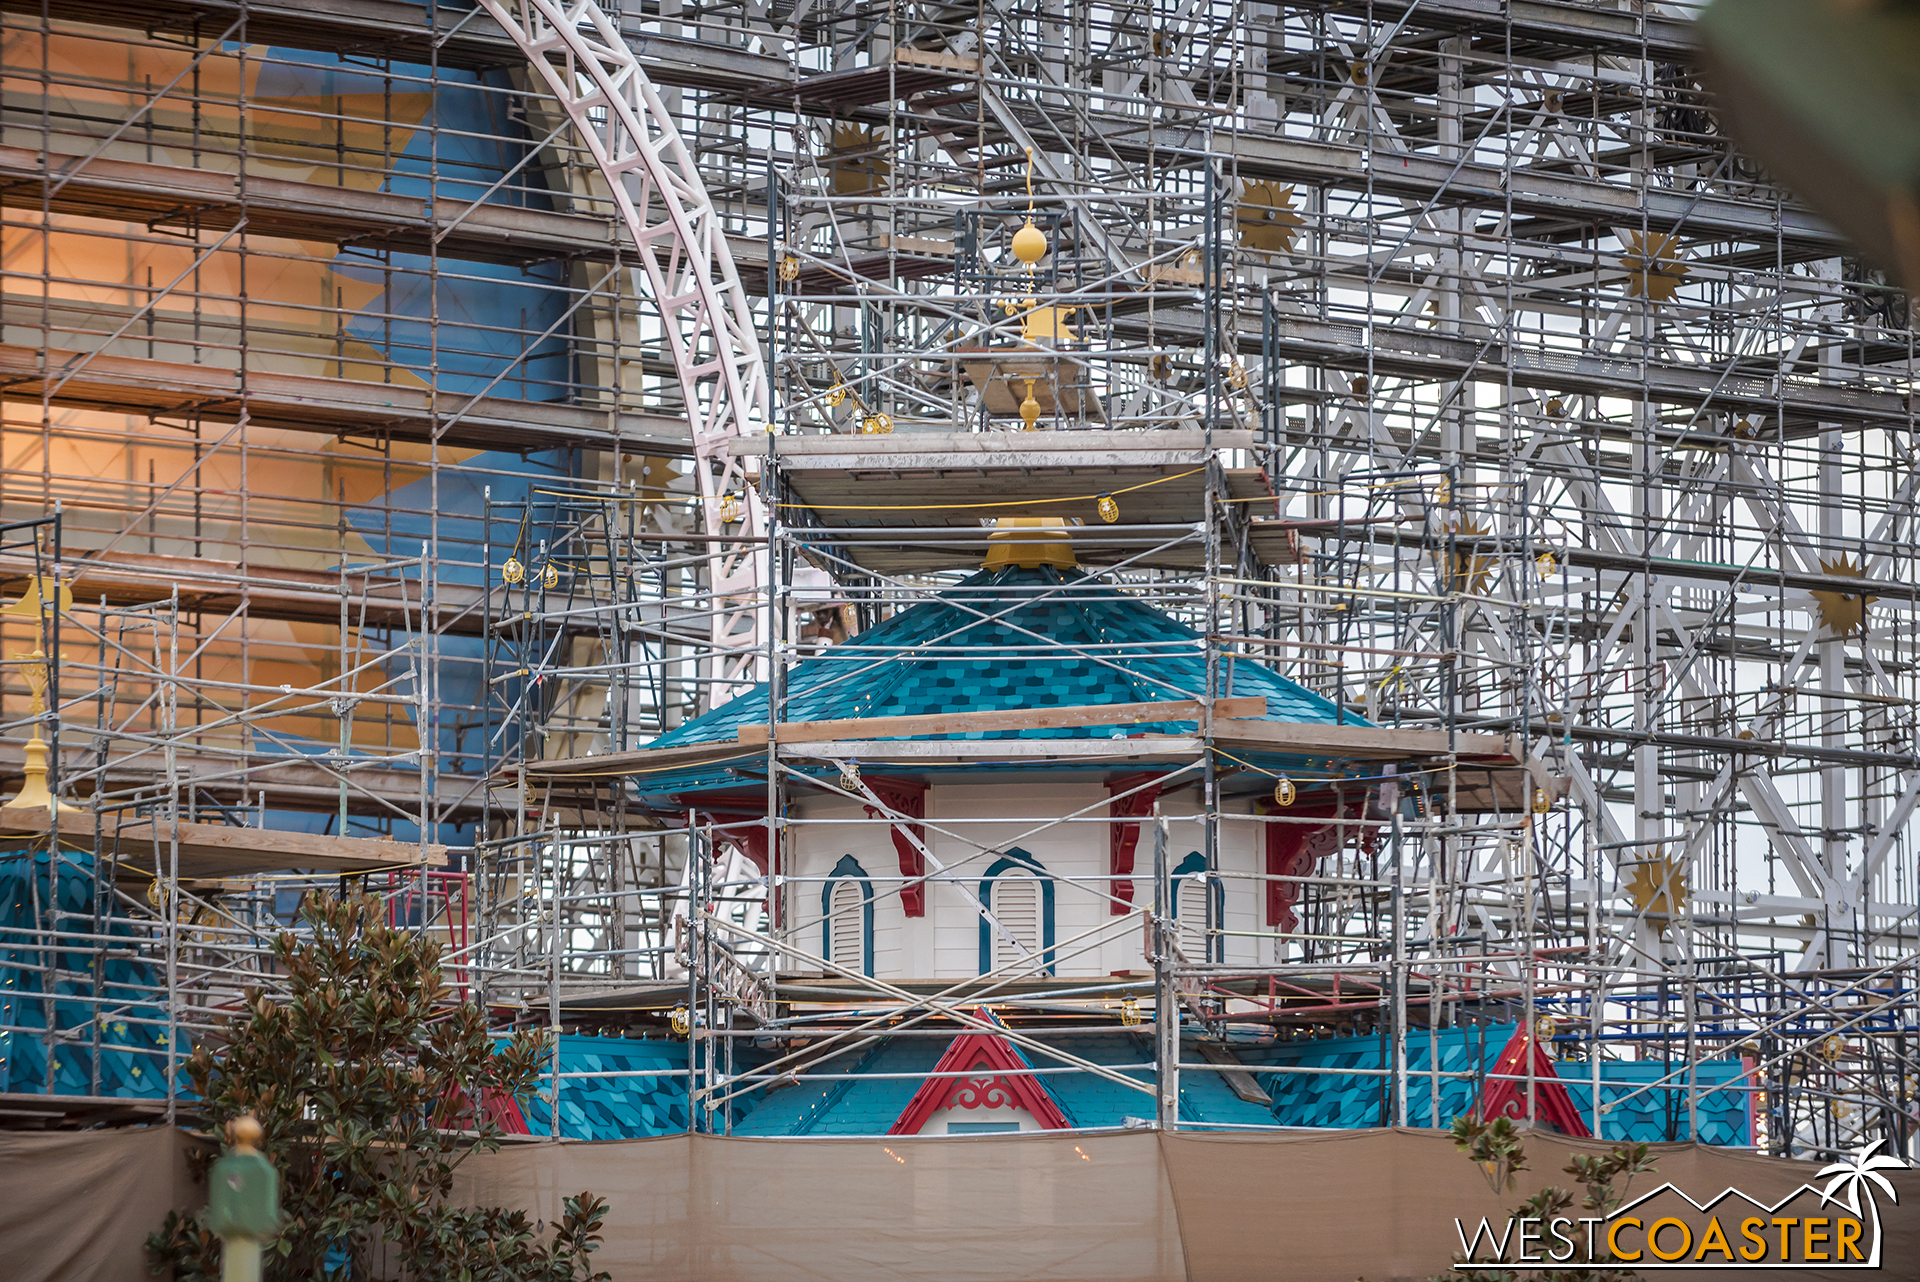  The new paint job on Midway Mania looks great, though! 